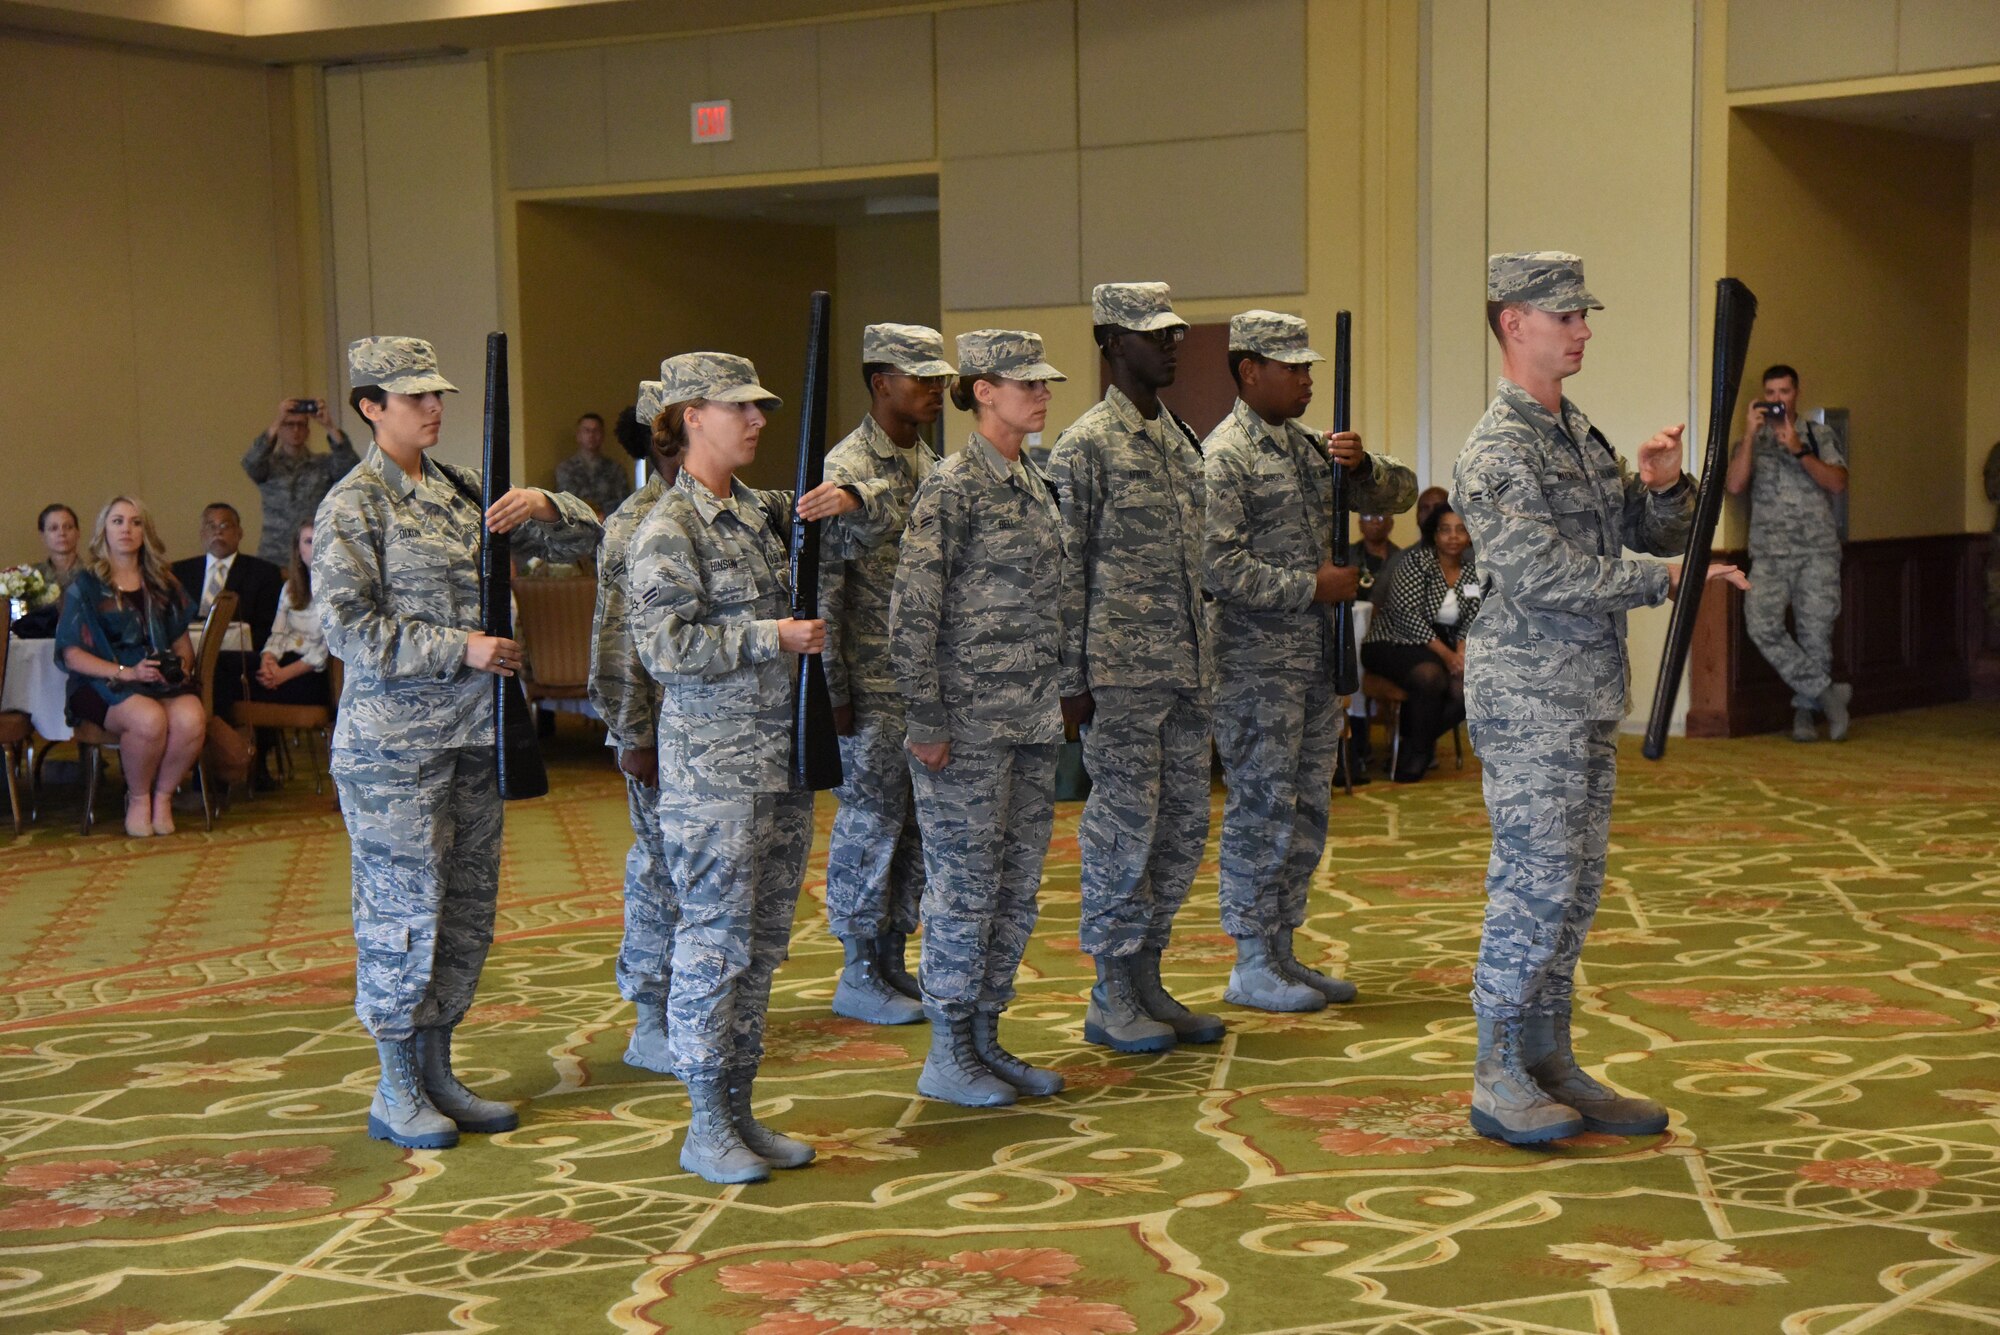 Members of the 335th Training Squadron drill team perform during the Biloxi Chamber Morning Call in the Bay Breeze Event Center at Keesler Air Force Base, Mississippi, Oct. 11, 2018. Local business and community leaders attended the event, hosted by the 81st Training Wing, to learn more about the base’s mission and its Airmen. (U.S. Air Force photo by Kemberly Groue)